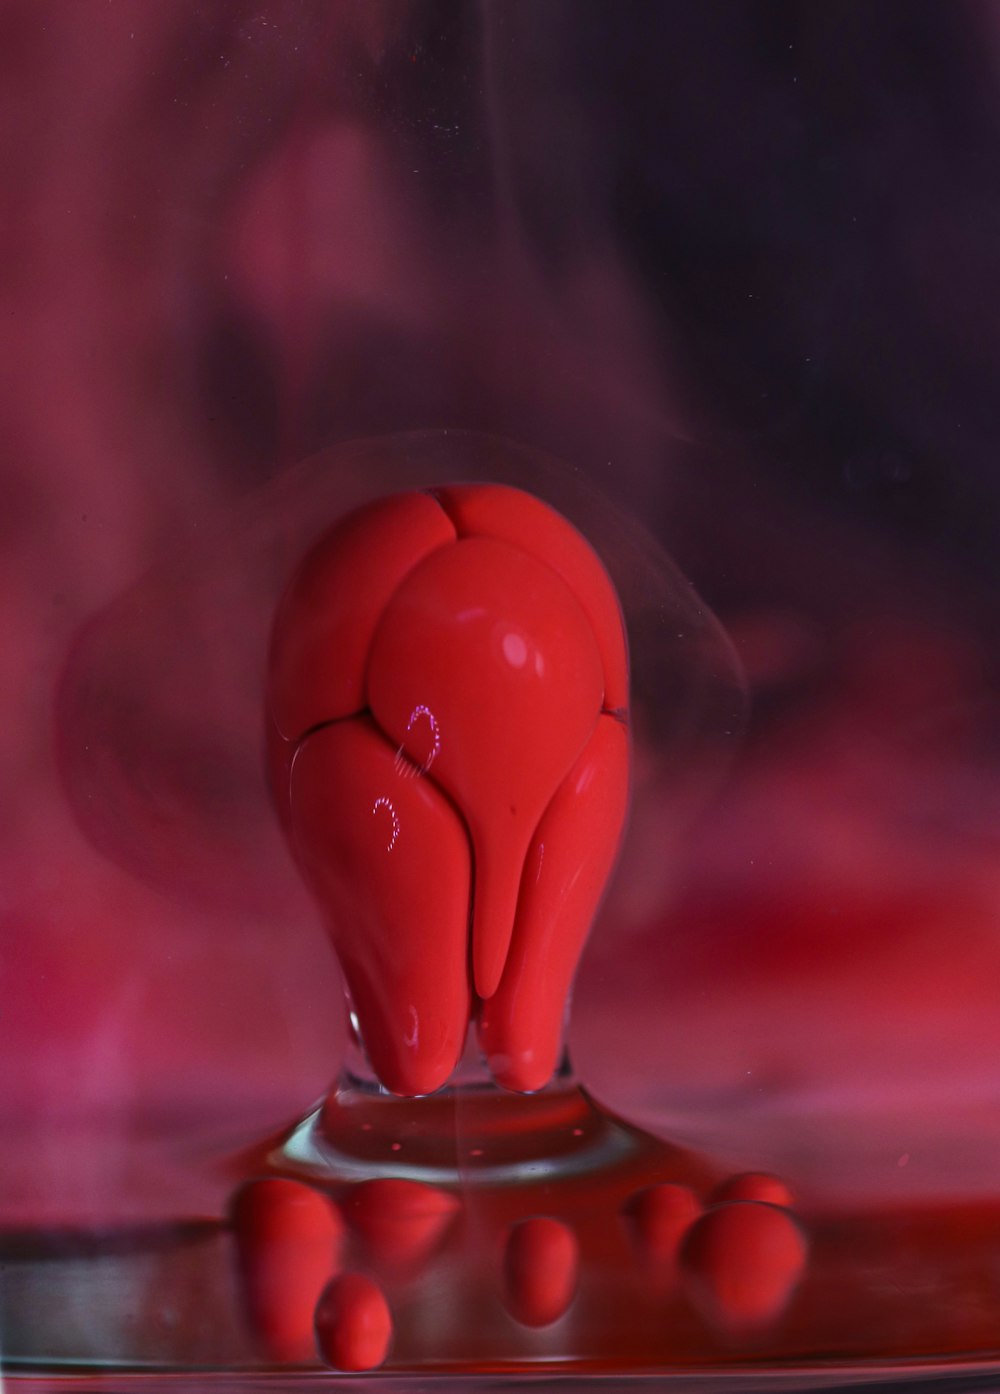 red heart figurine on pink surface